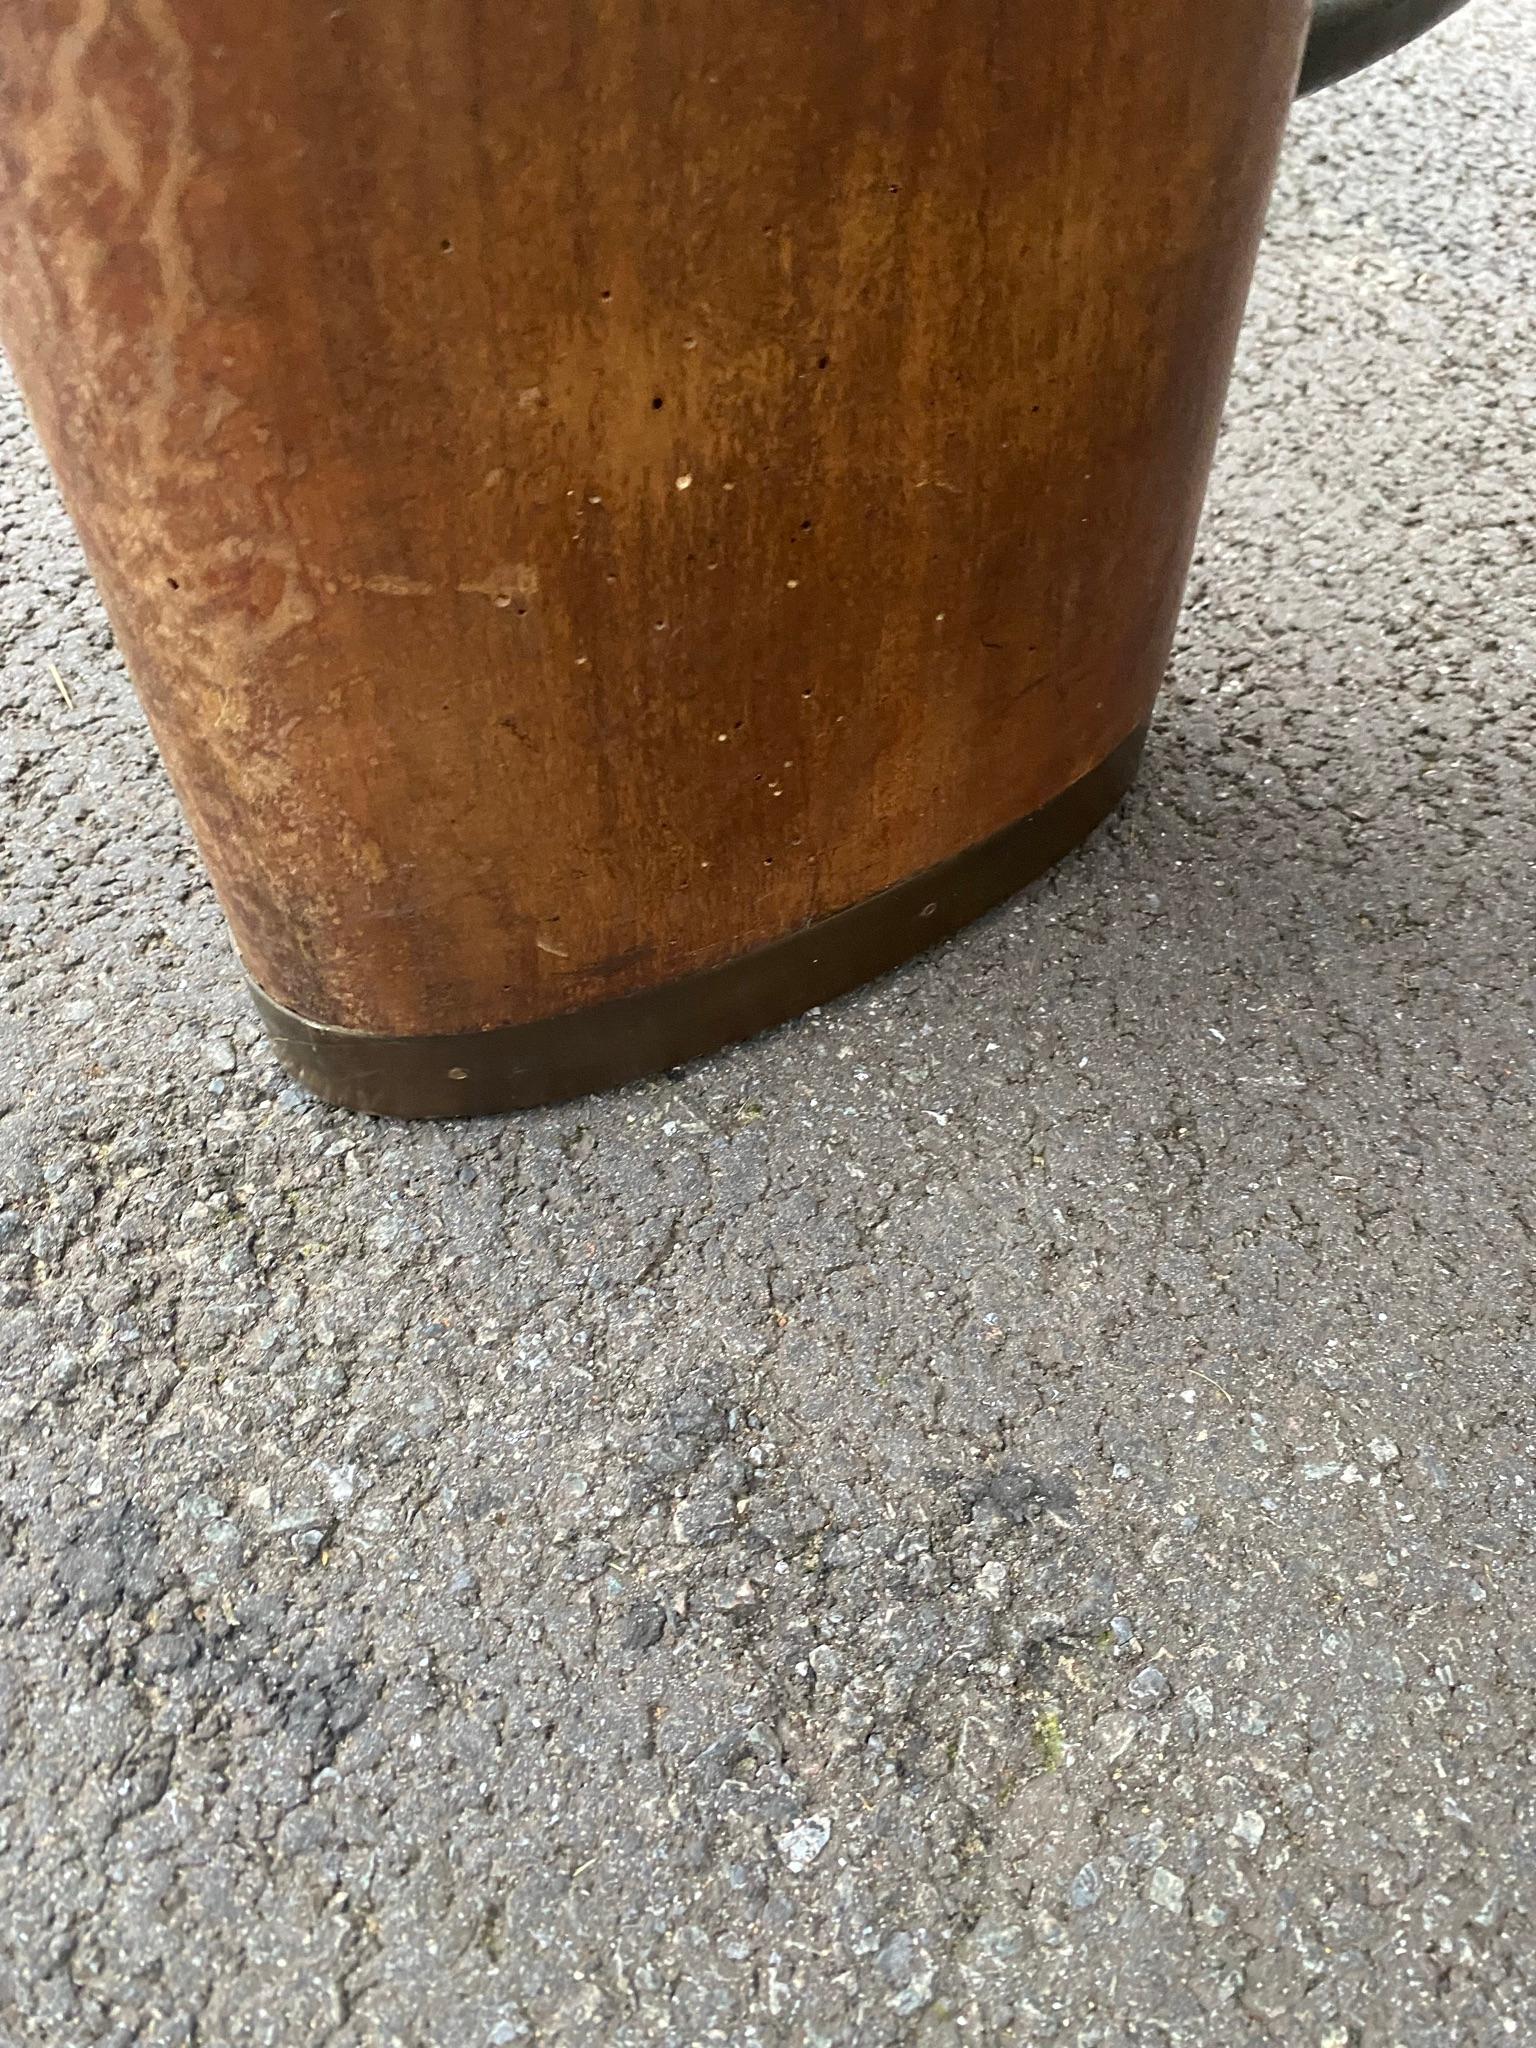 Modernist Art Deco Desk or Table in Walnut, Metal Spacer and Shoe, circa 1930 For Sale 1